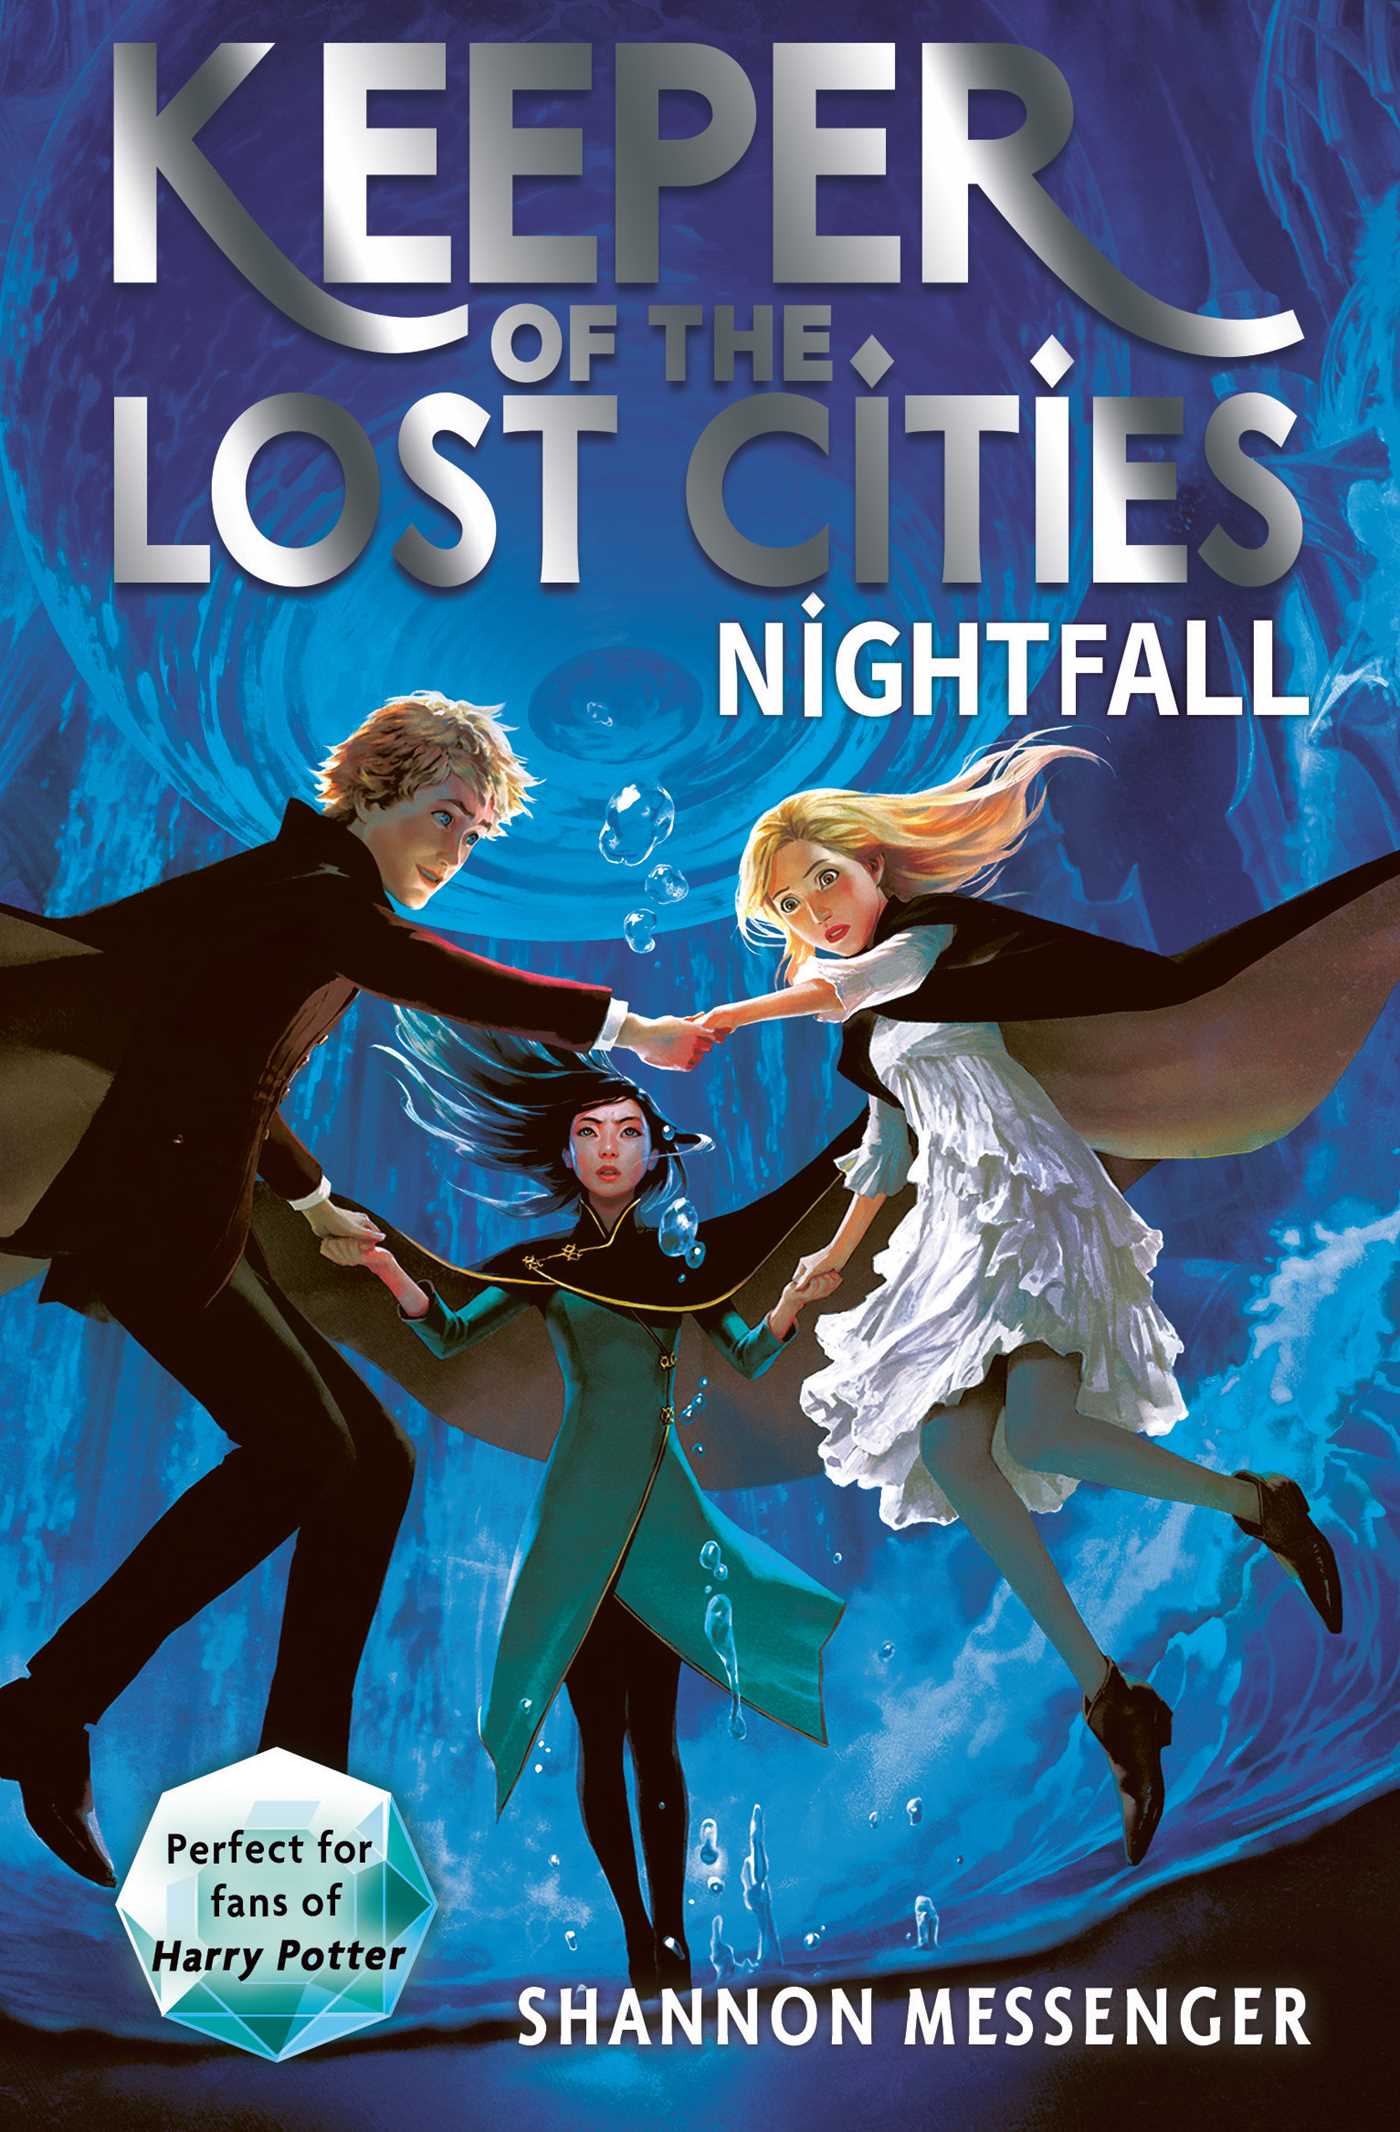 NIGHTFALL (KEEPER OF THE LOST CITIES BOOK 6)